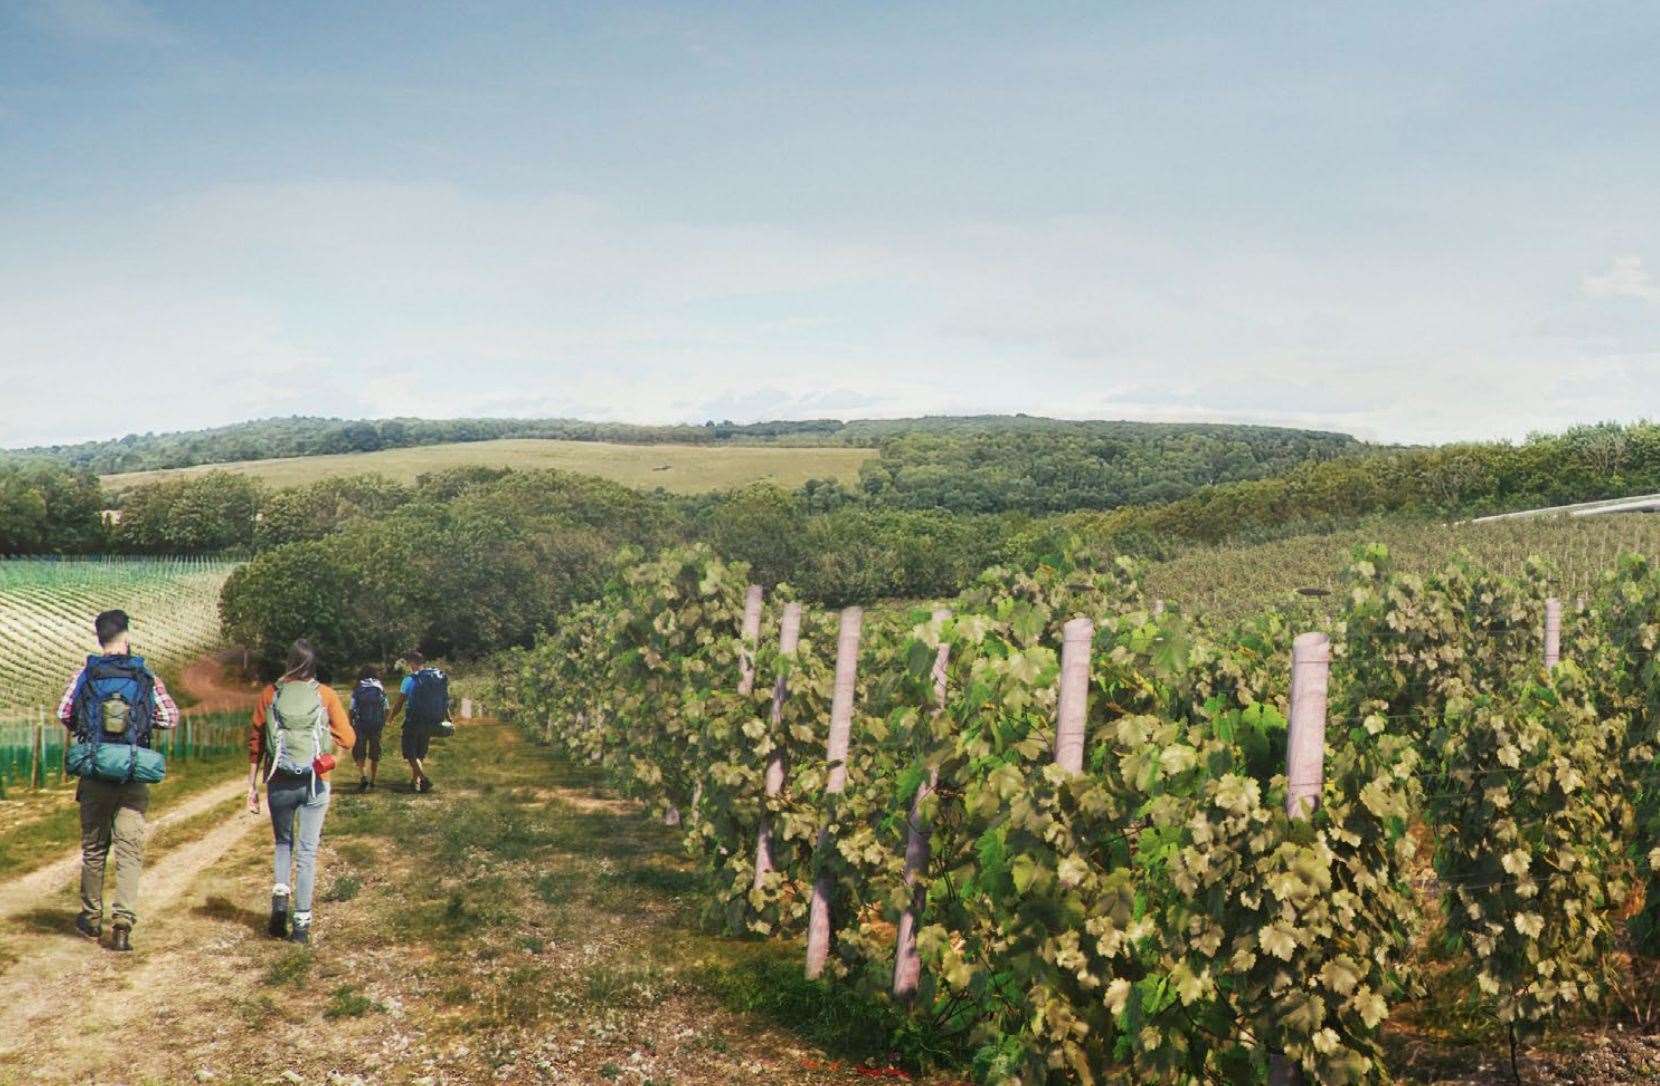 Vineyard Farms Ltd wanted to invest £30 million into the scheme. Picture: Vineyard Farms Ltd/ Foster + Partners